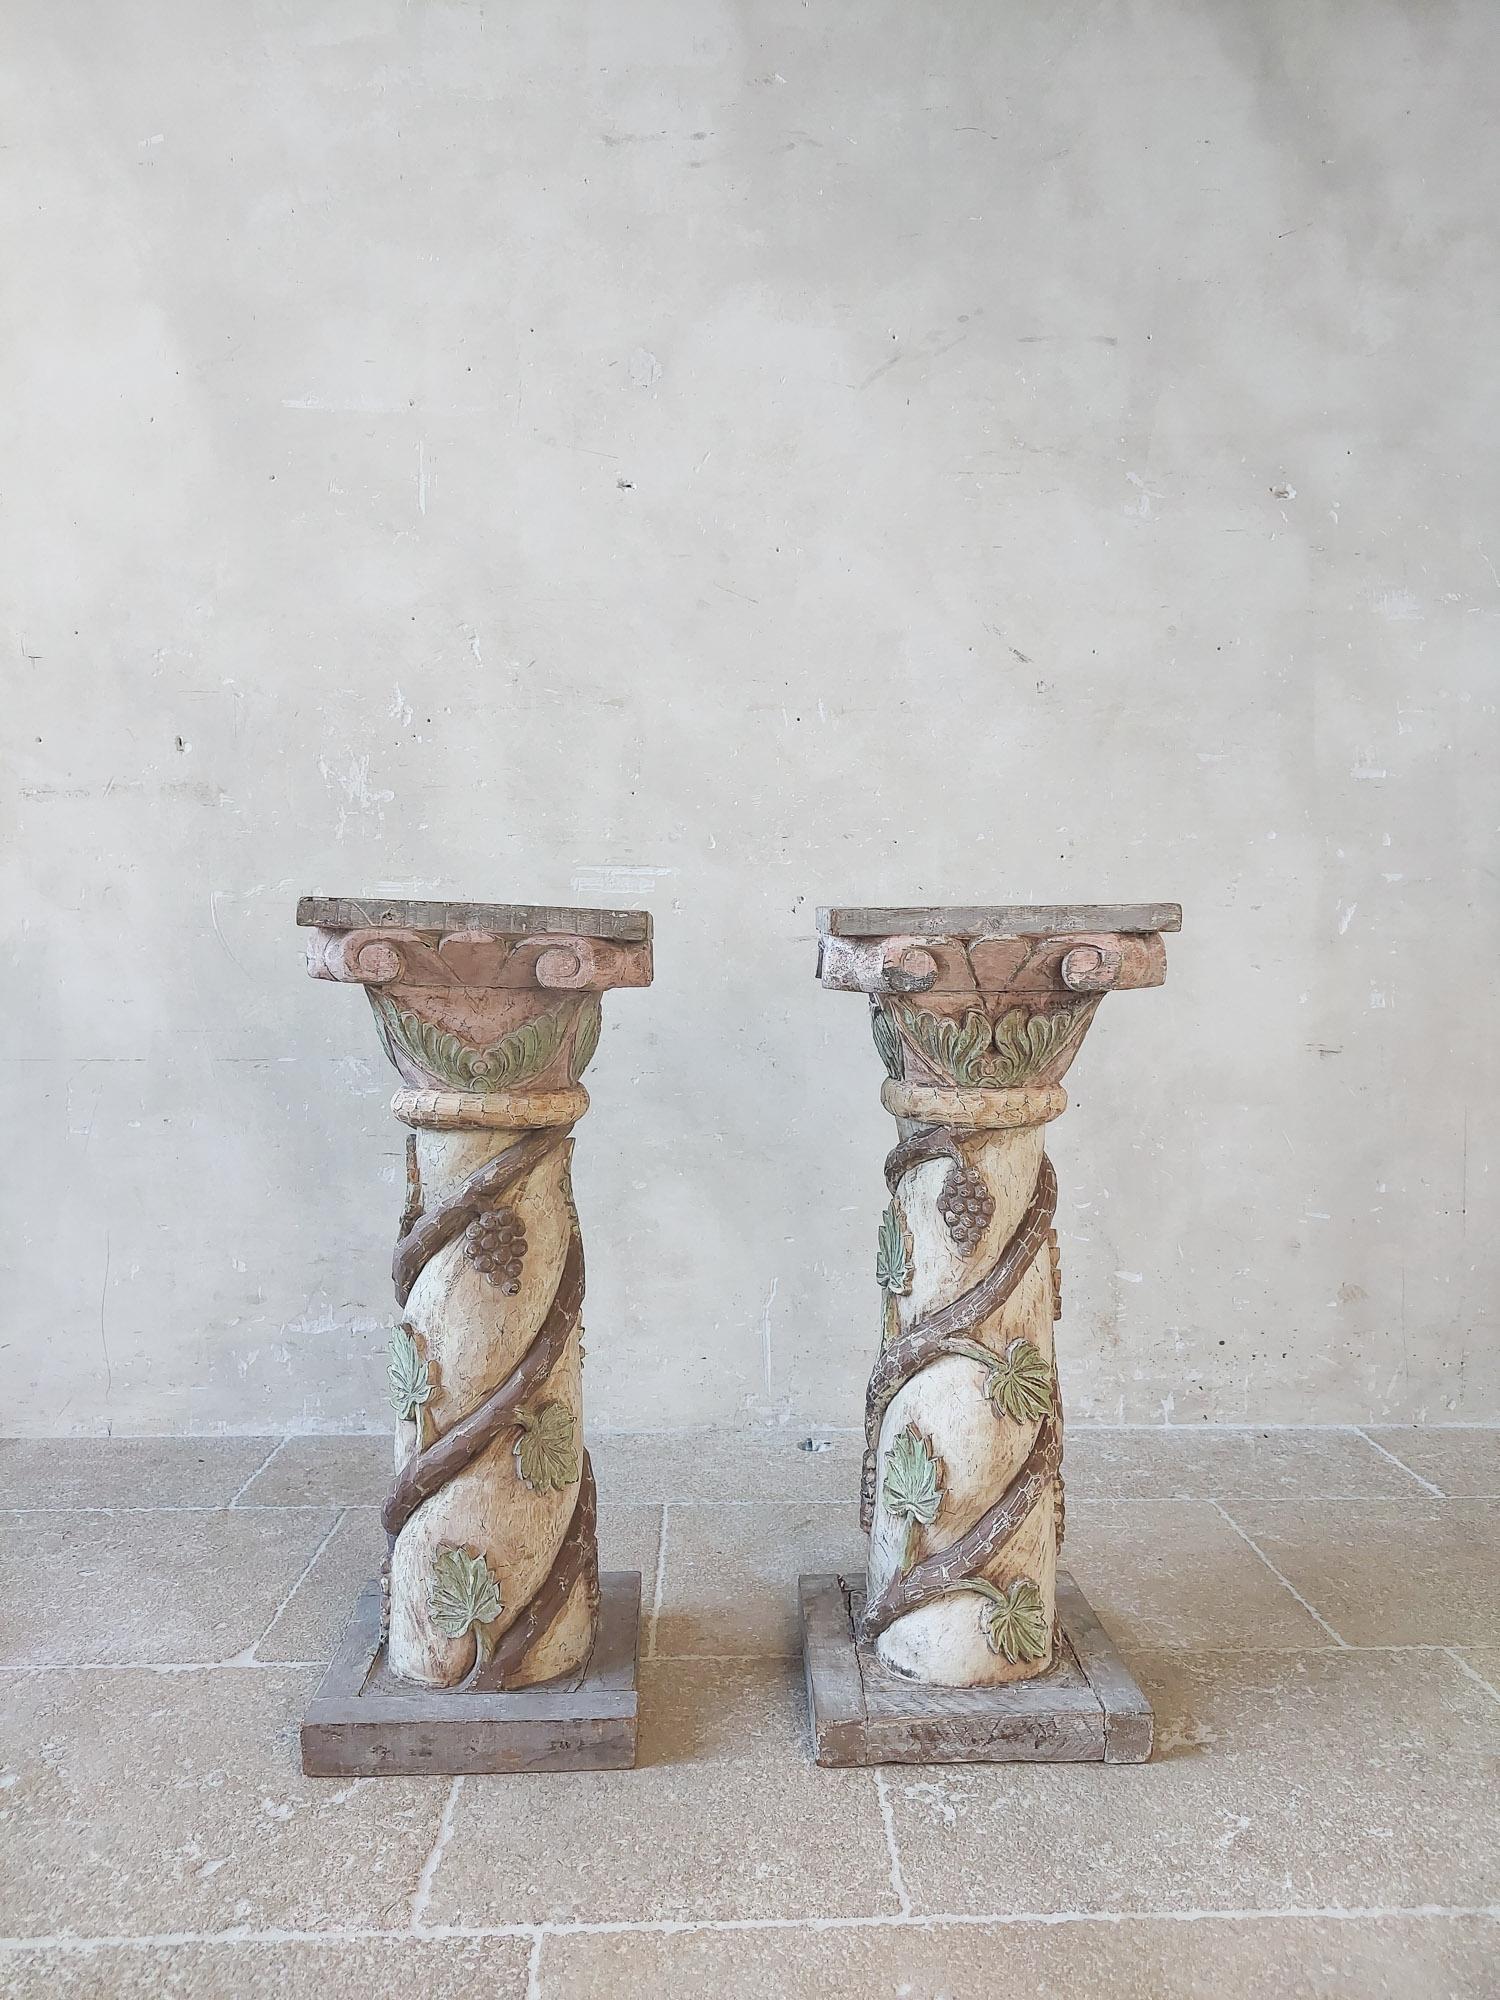 Pair of antique carved wooden pedestals.Italian column parts made into plinths. Beautifully carved wooden details with grape vines. Old patina in soft color tones such as cream, pink, green and grey.

H 76 x 30 x 30 cm.